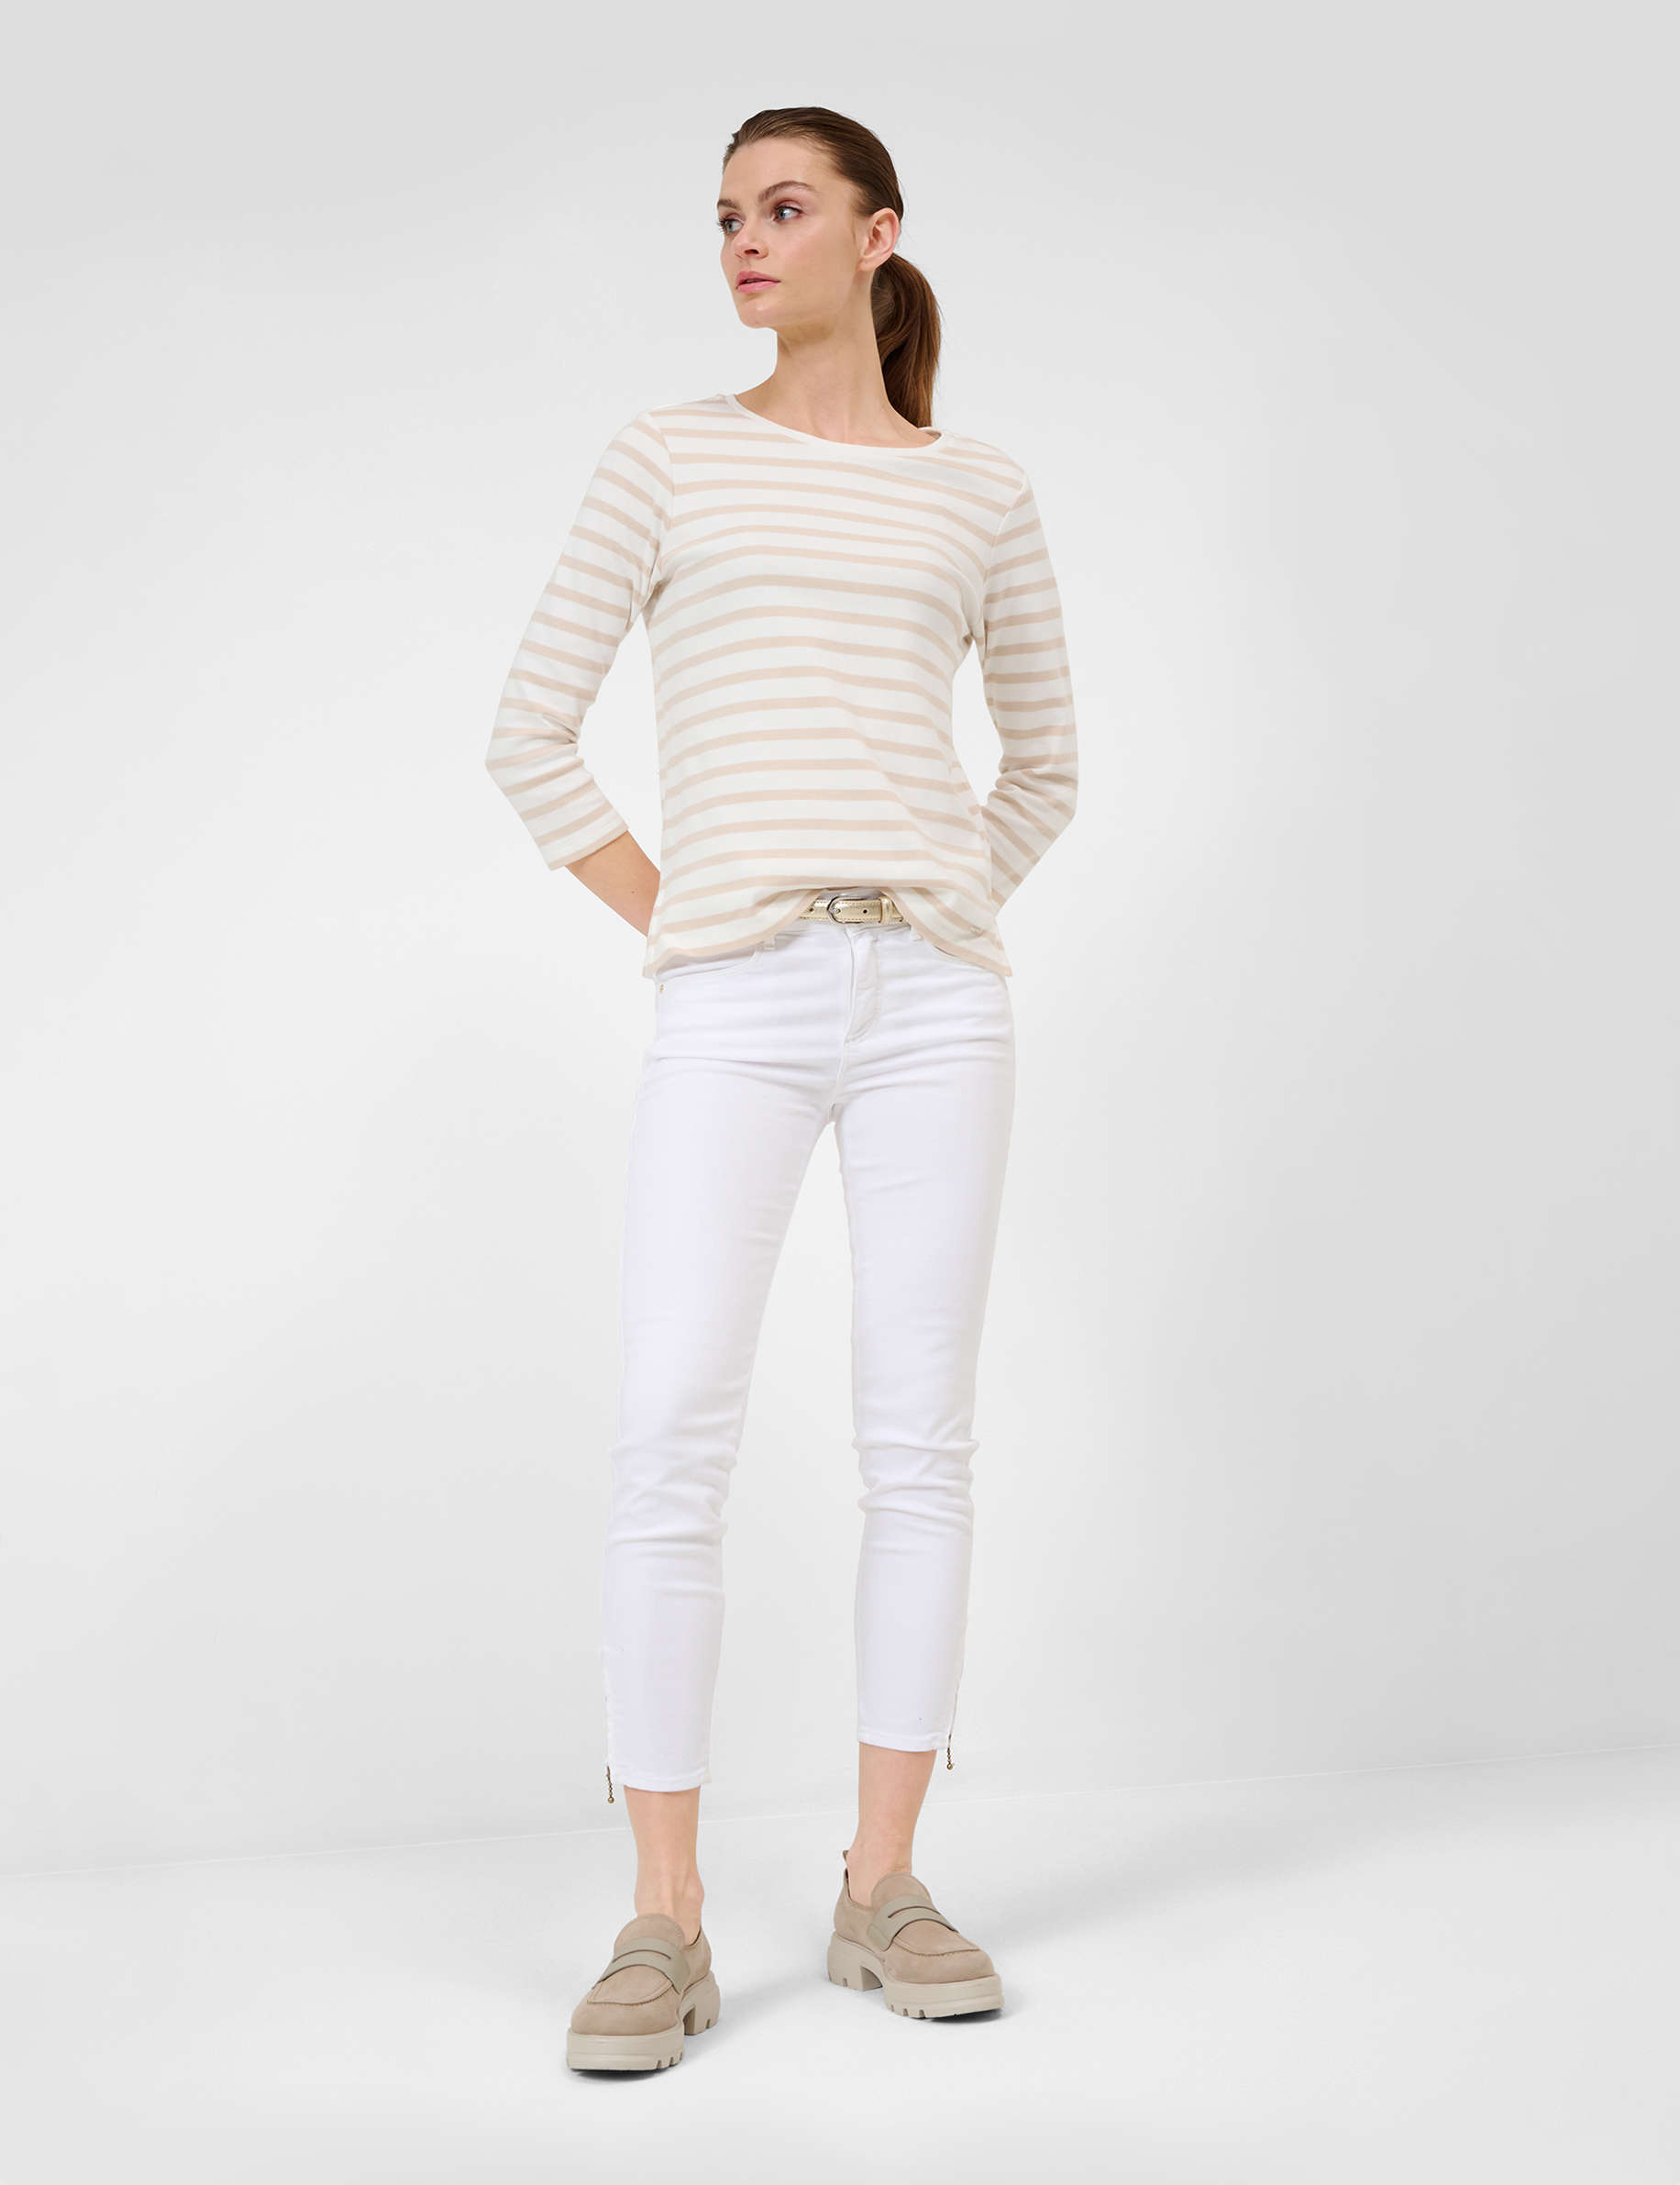 Women Style ANA S WHITE Skinny Fit Model Outfit